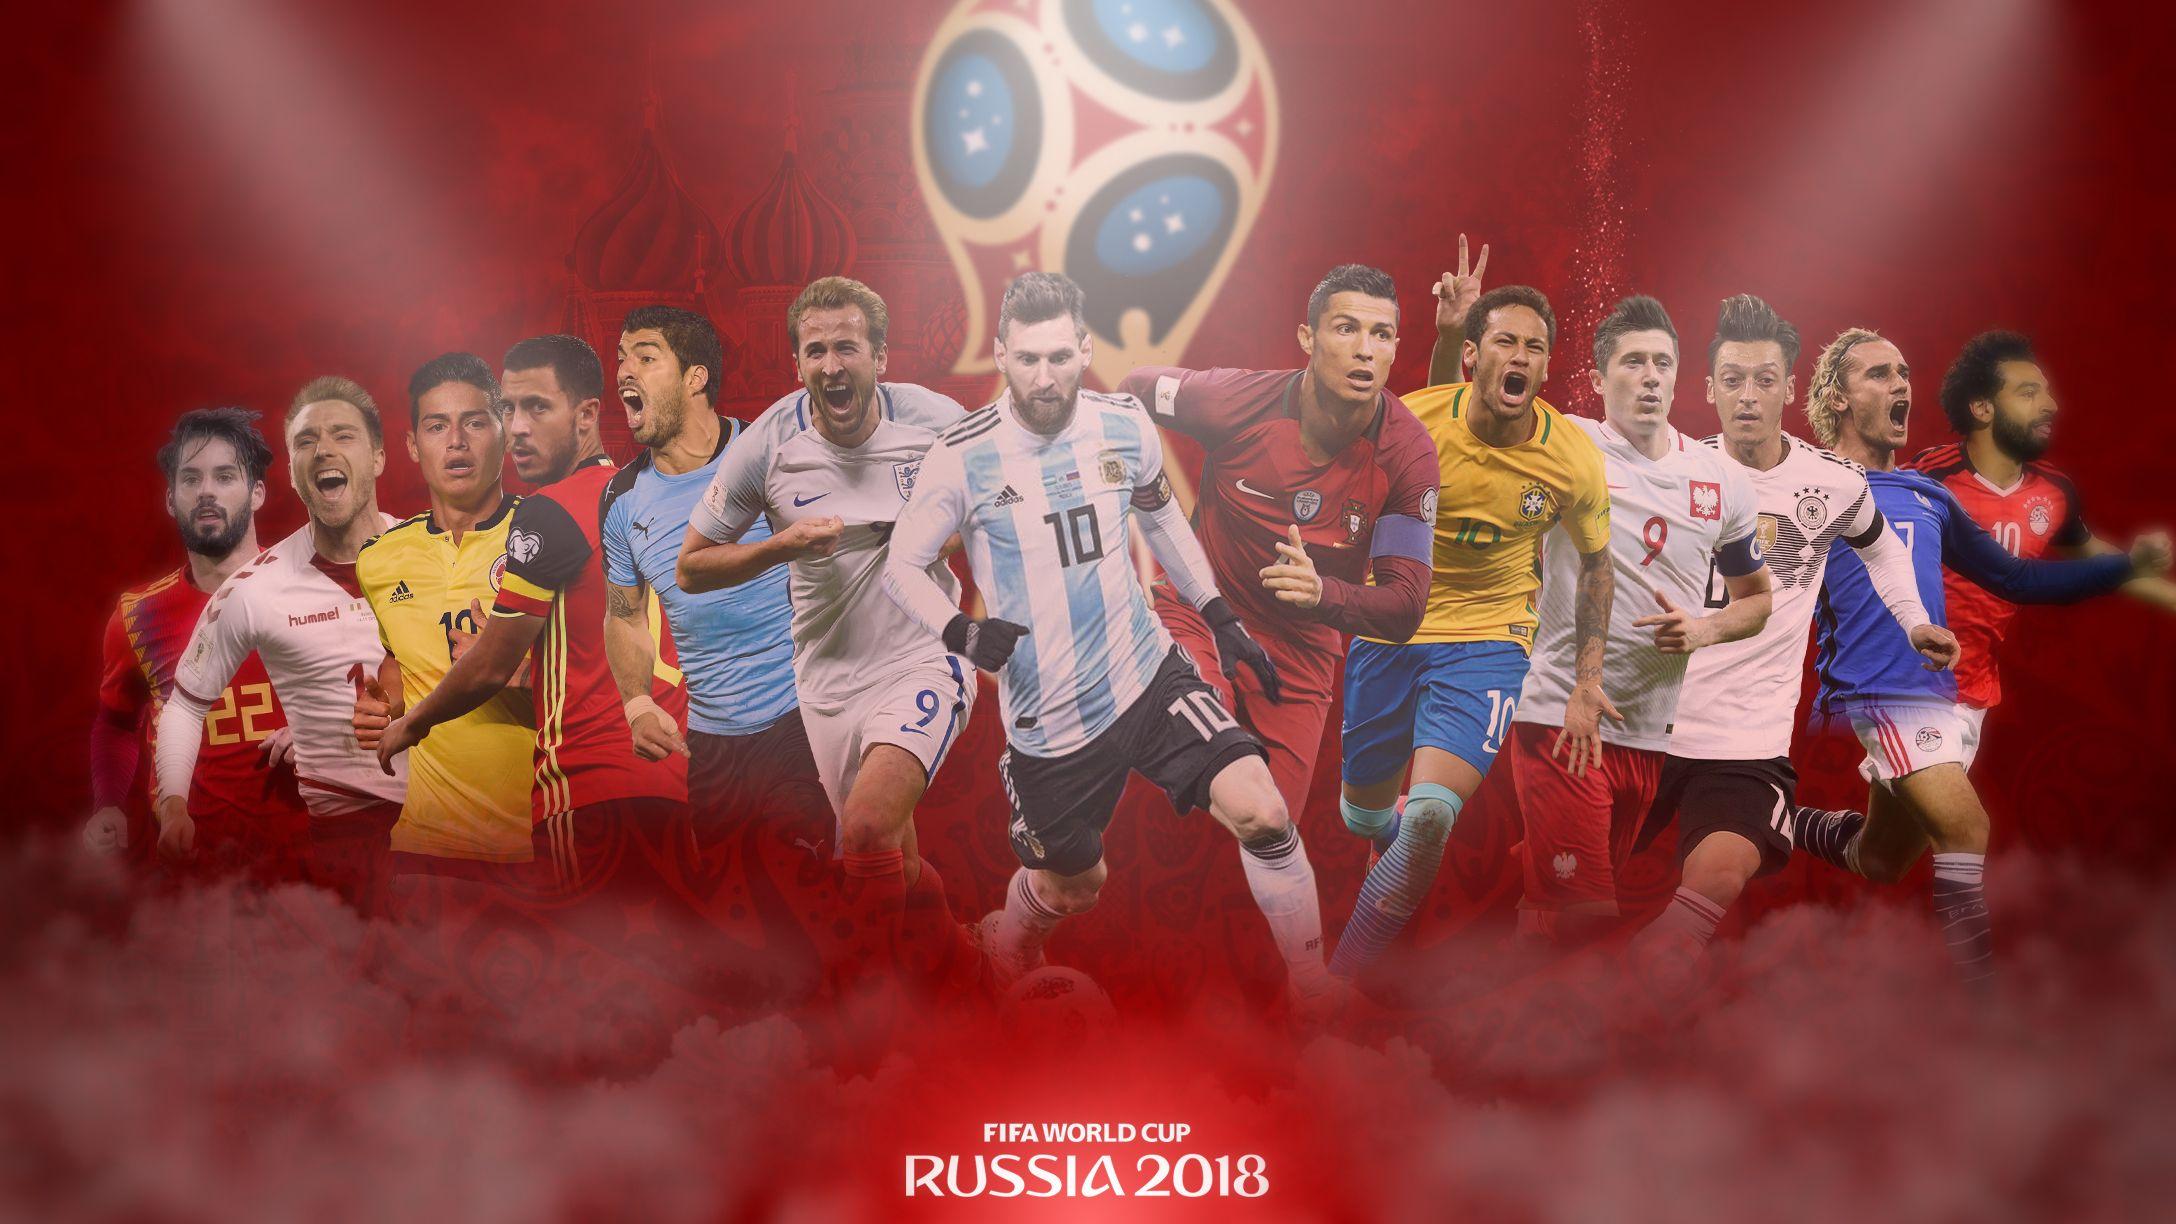 FIFA World Cup 2018 HD Wallpaper Download. FIFA World Cup 2018